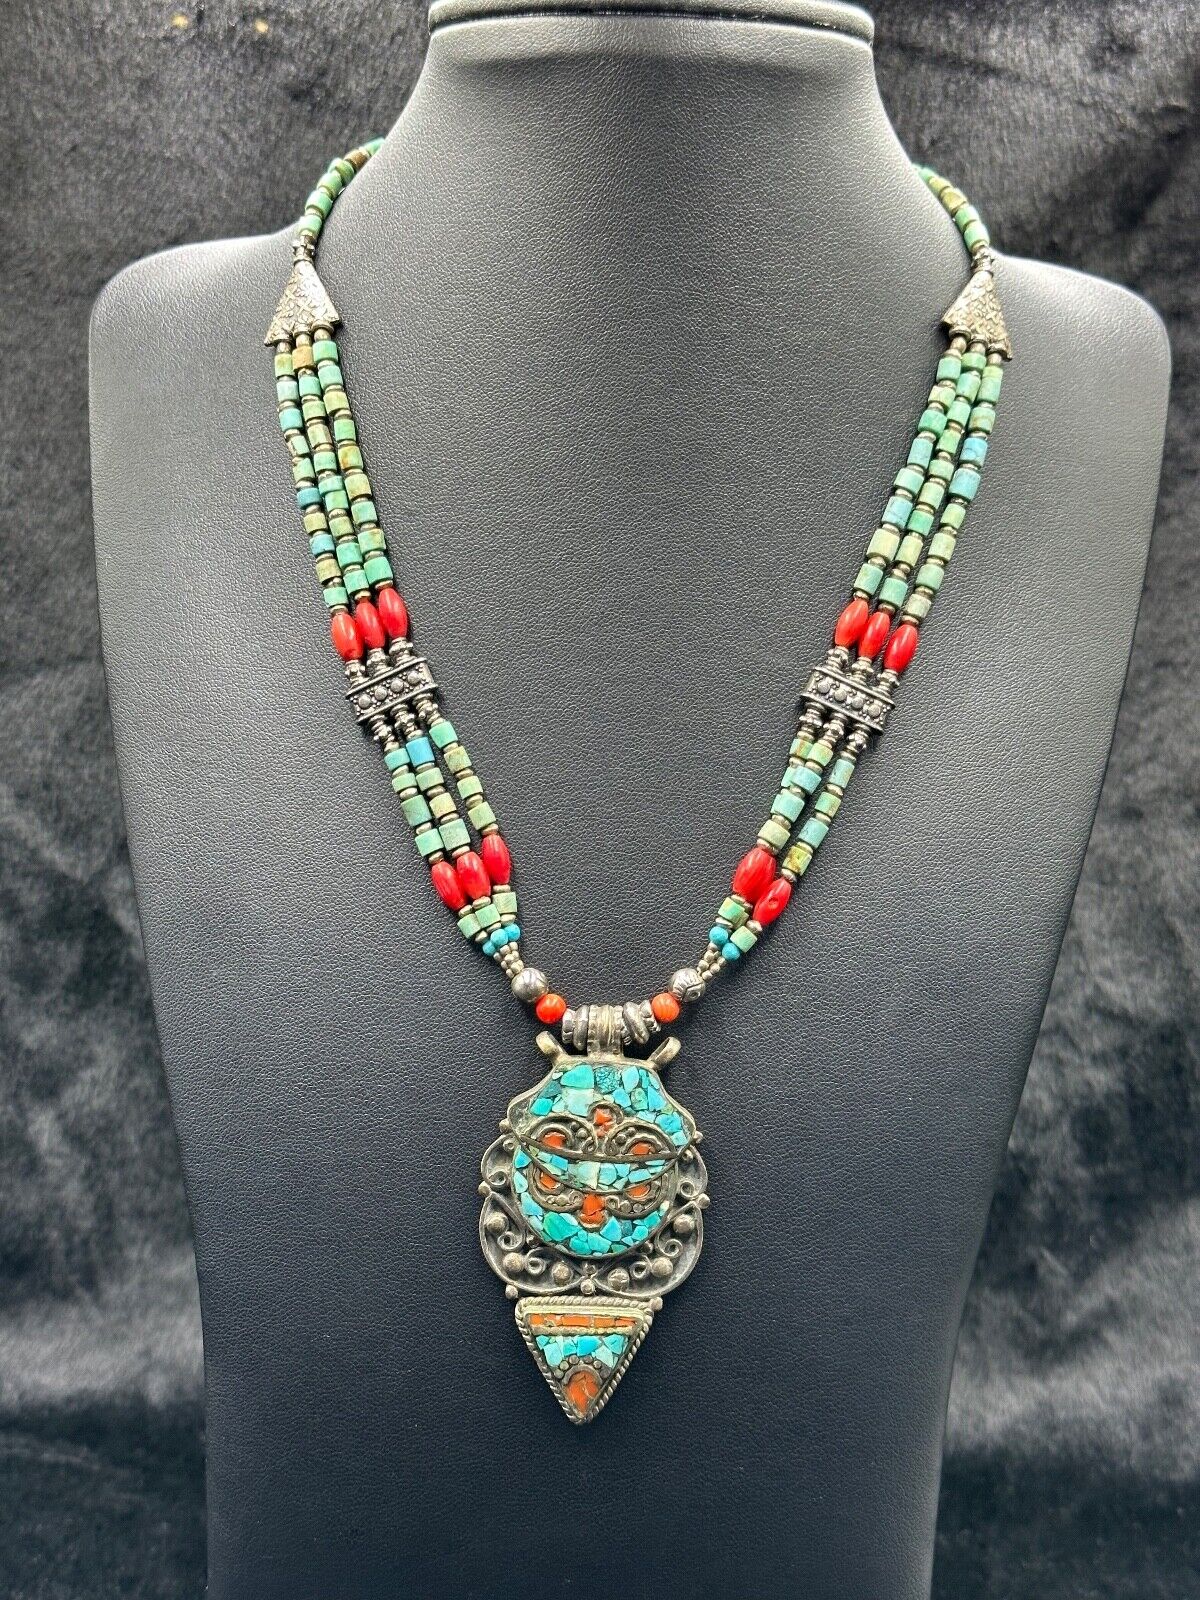 Vintage Nepali Tibetan Beautiful Design Necklace With Turquoise And Coral Stone